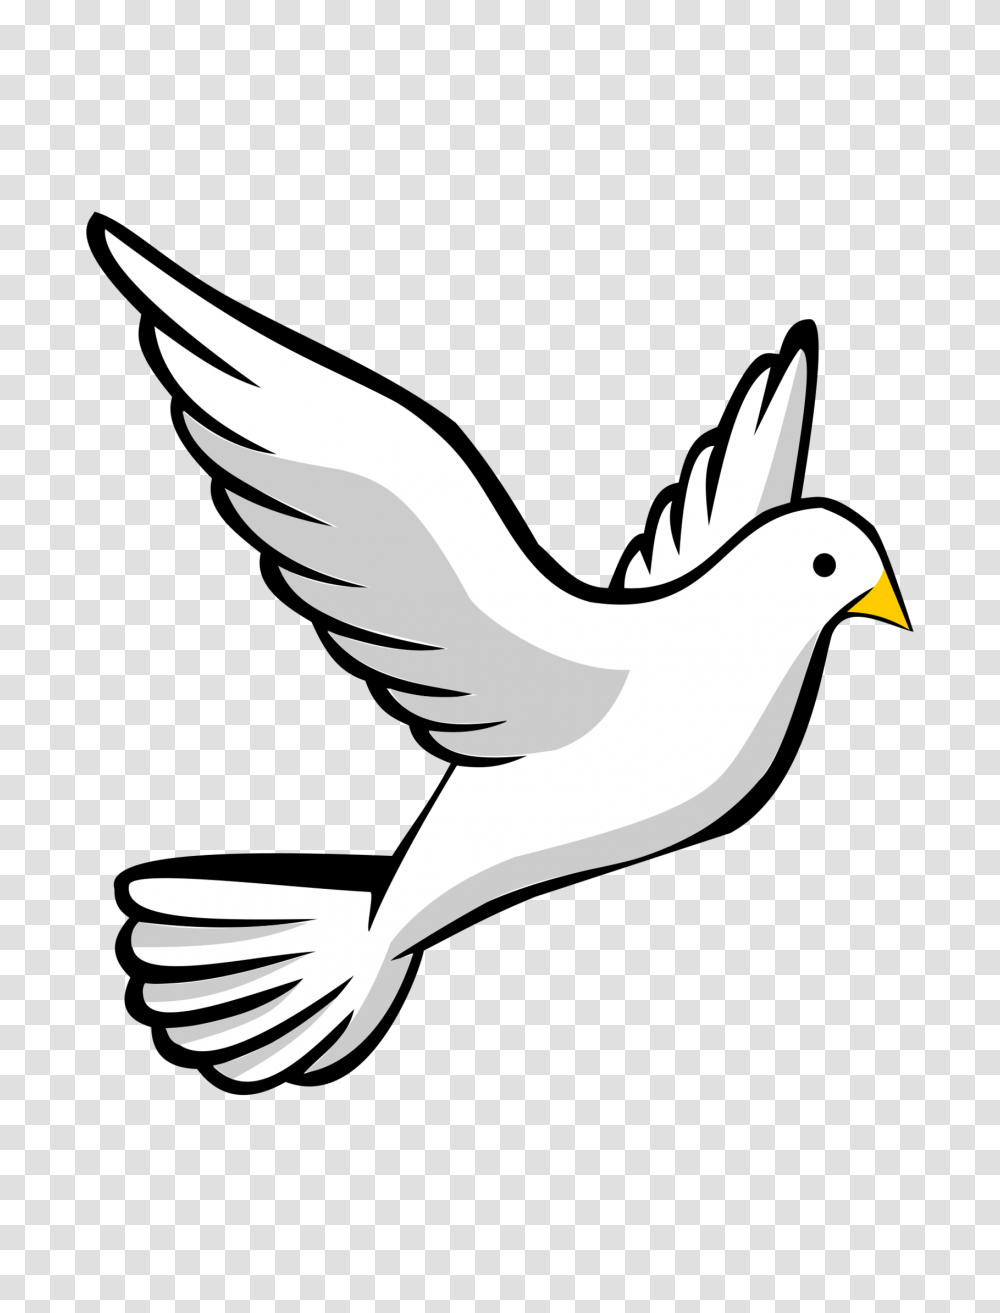 Free Clipart Of A Black And White Bird Feeder House Clip Art, Animal, Flying, Sea Life Transparent Png